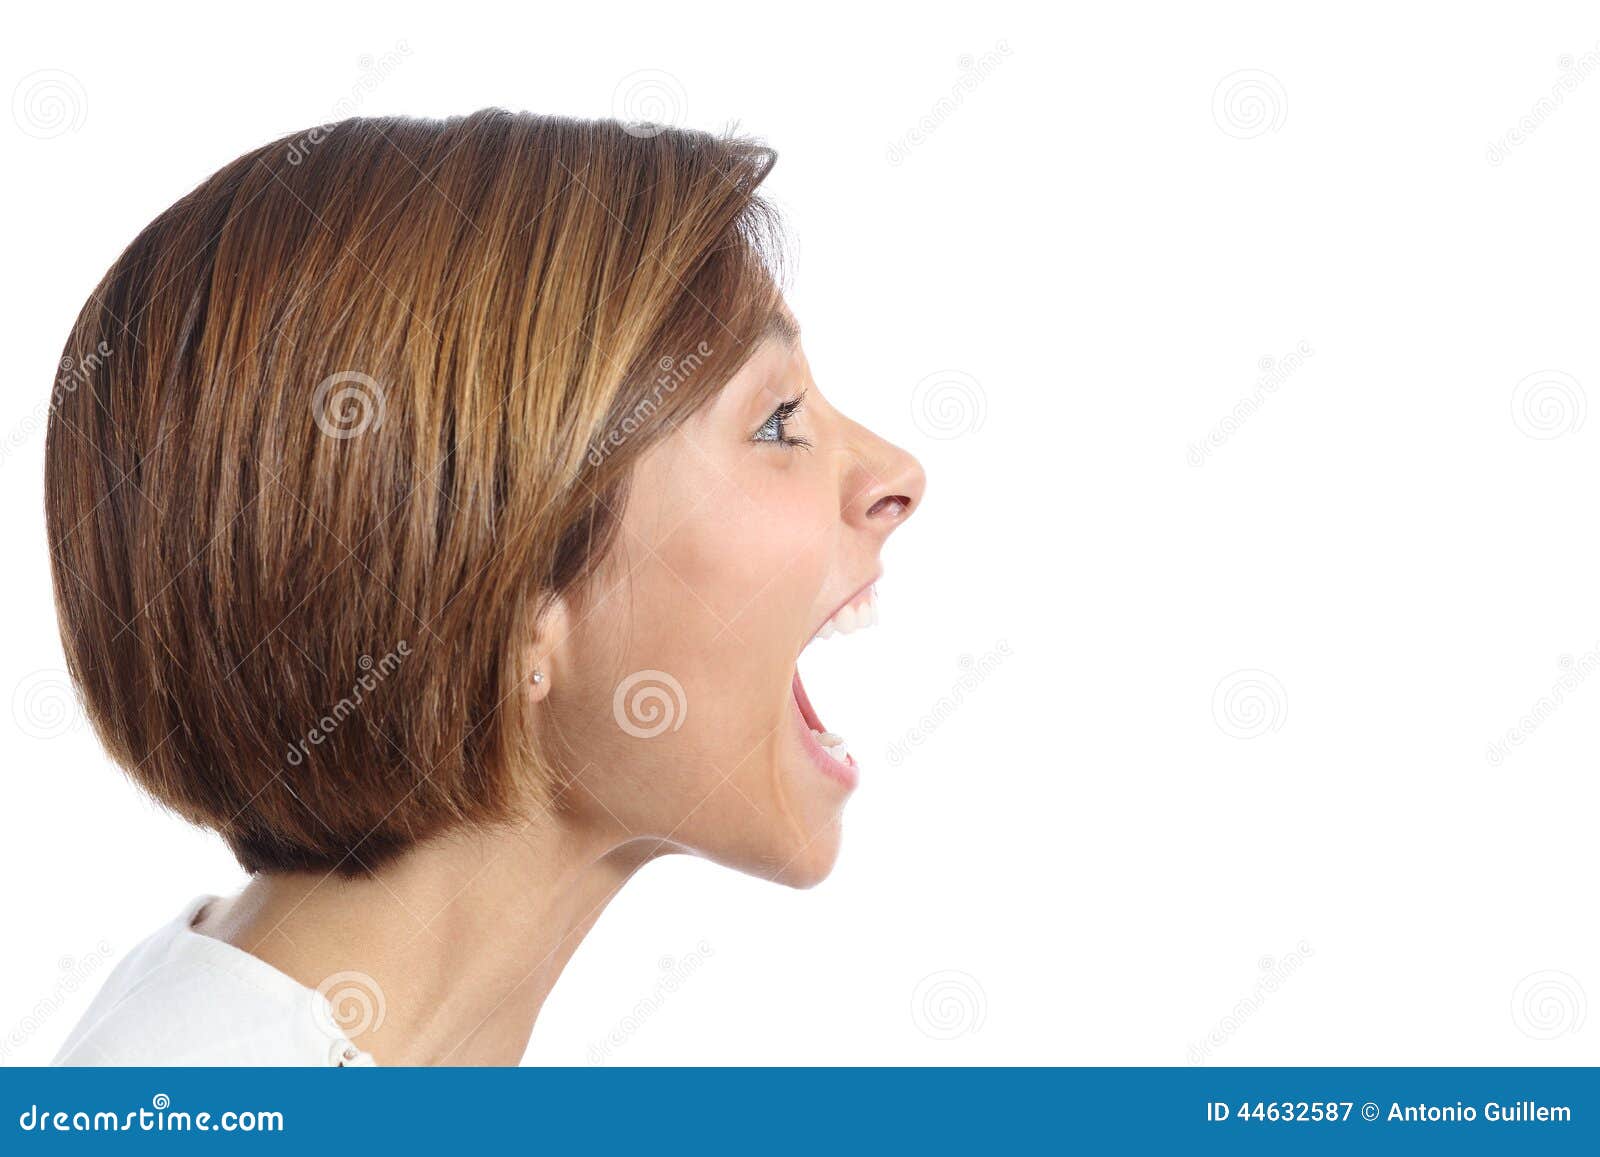 profile of an angry young woman shouting